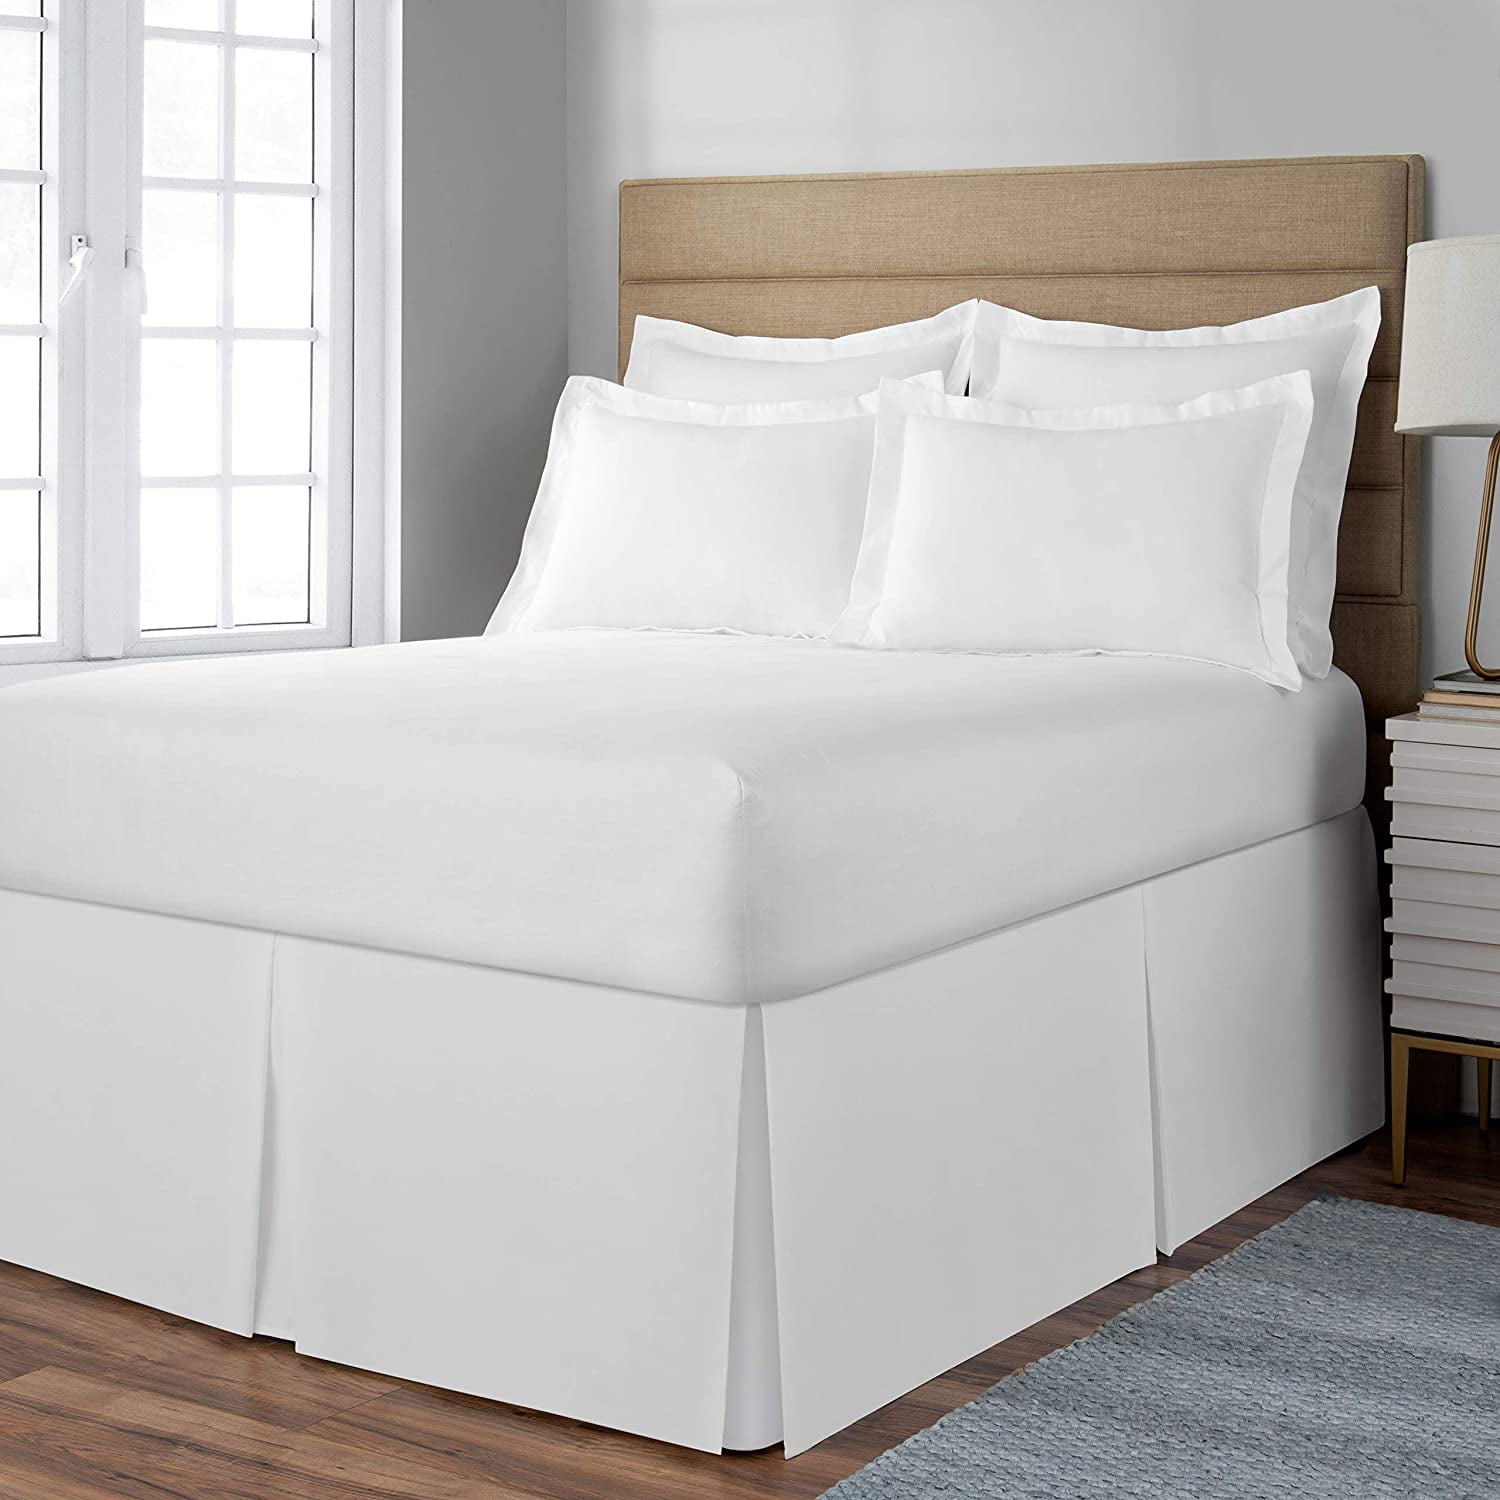 LDC Lux Decor Collection Queen Bed Skirt - Easy Fit with 14 Inch ...